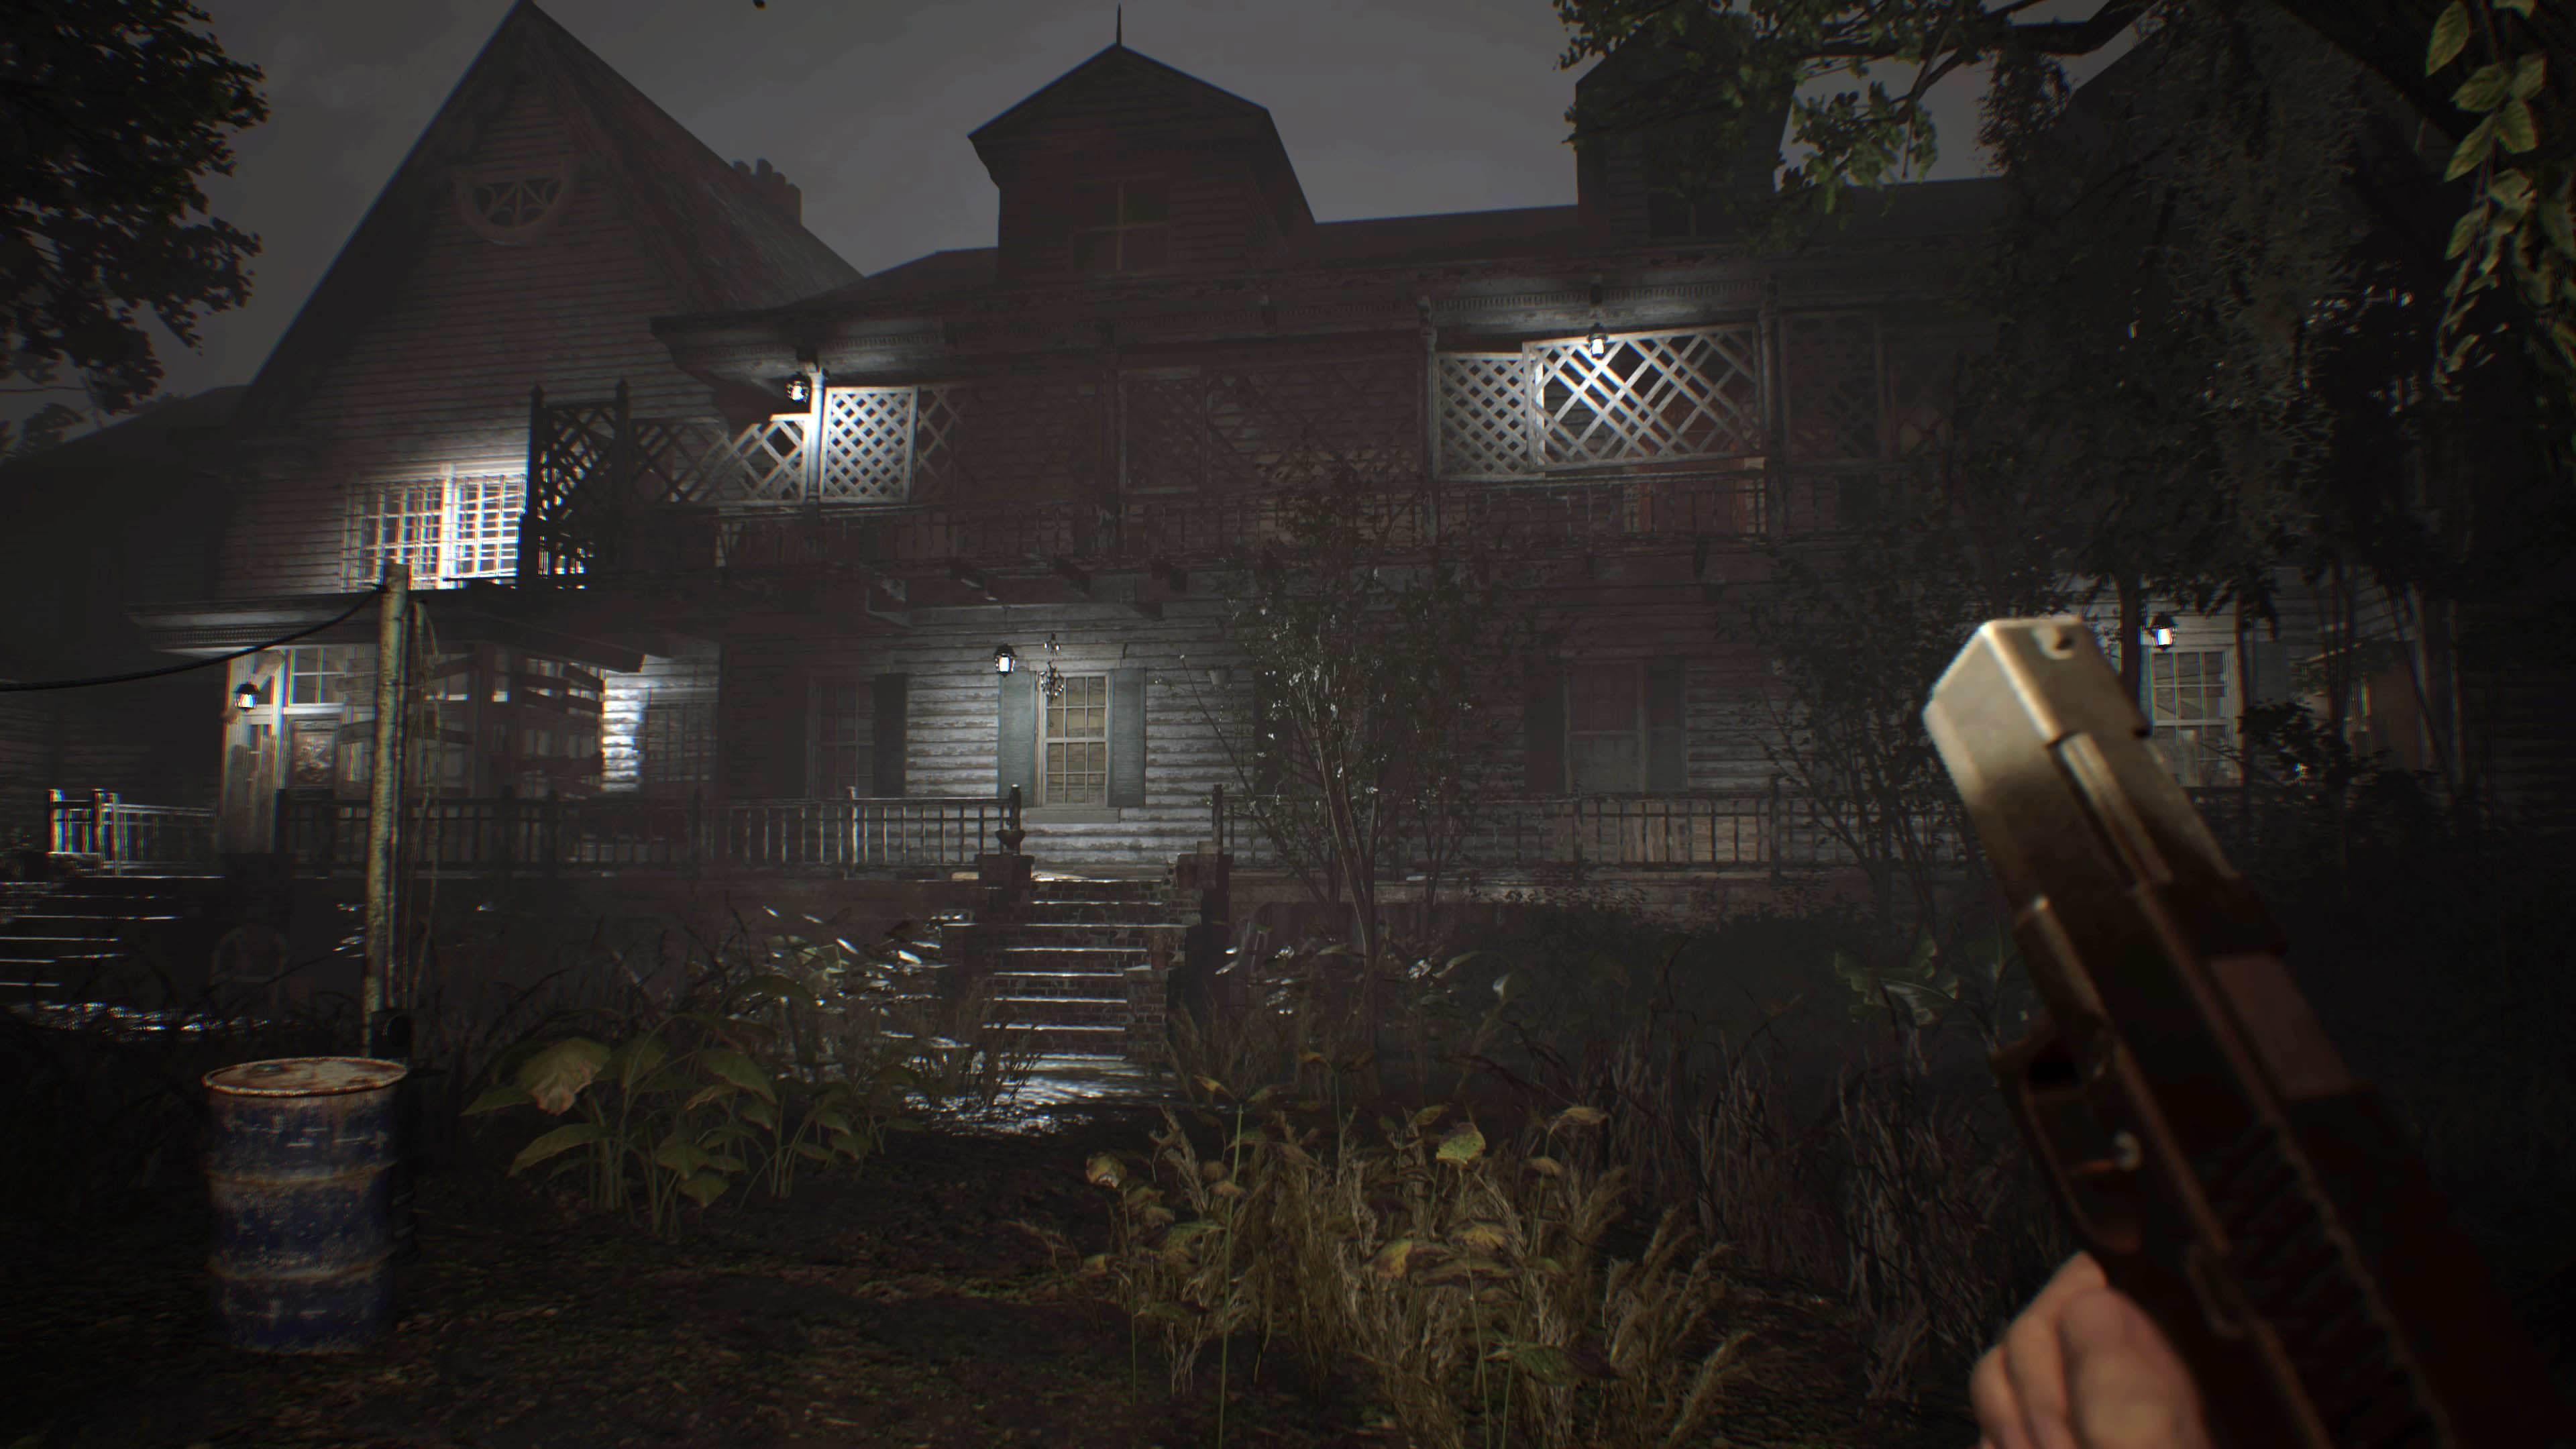 resident evil 7 free pc download